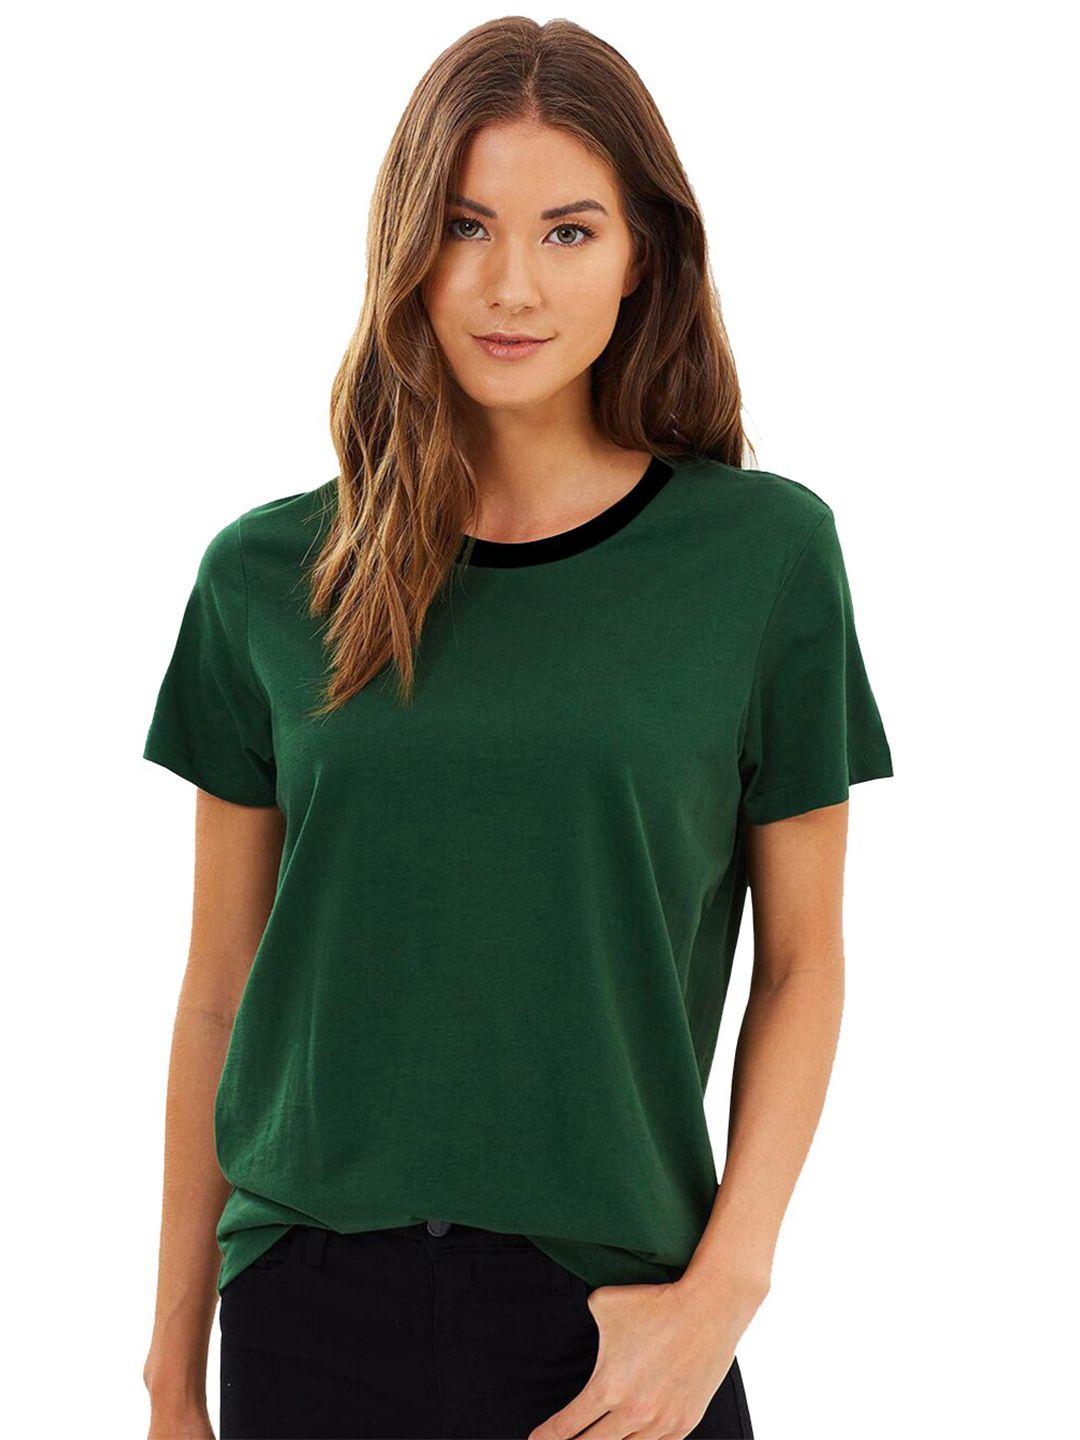 trends-tower-round-neck-pure-cotton-t-shirt